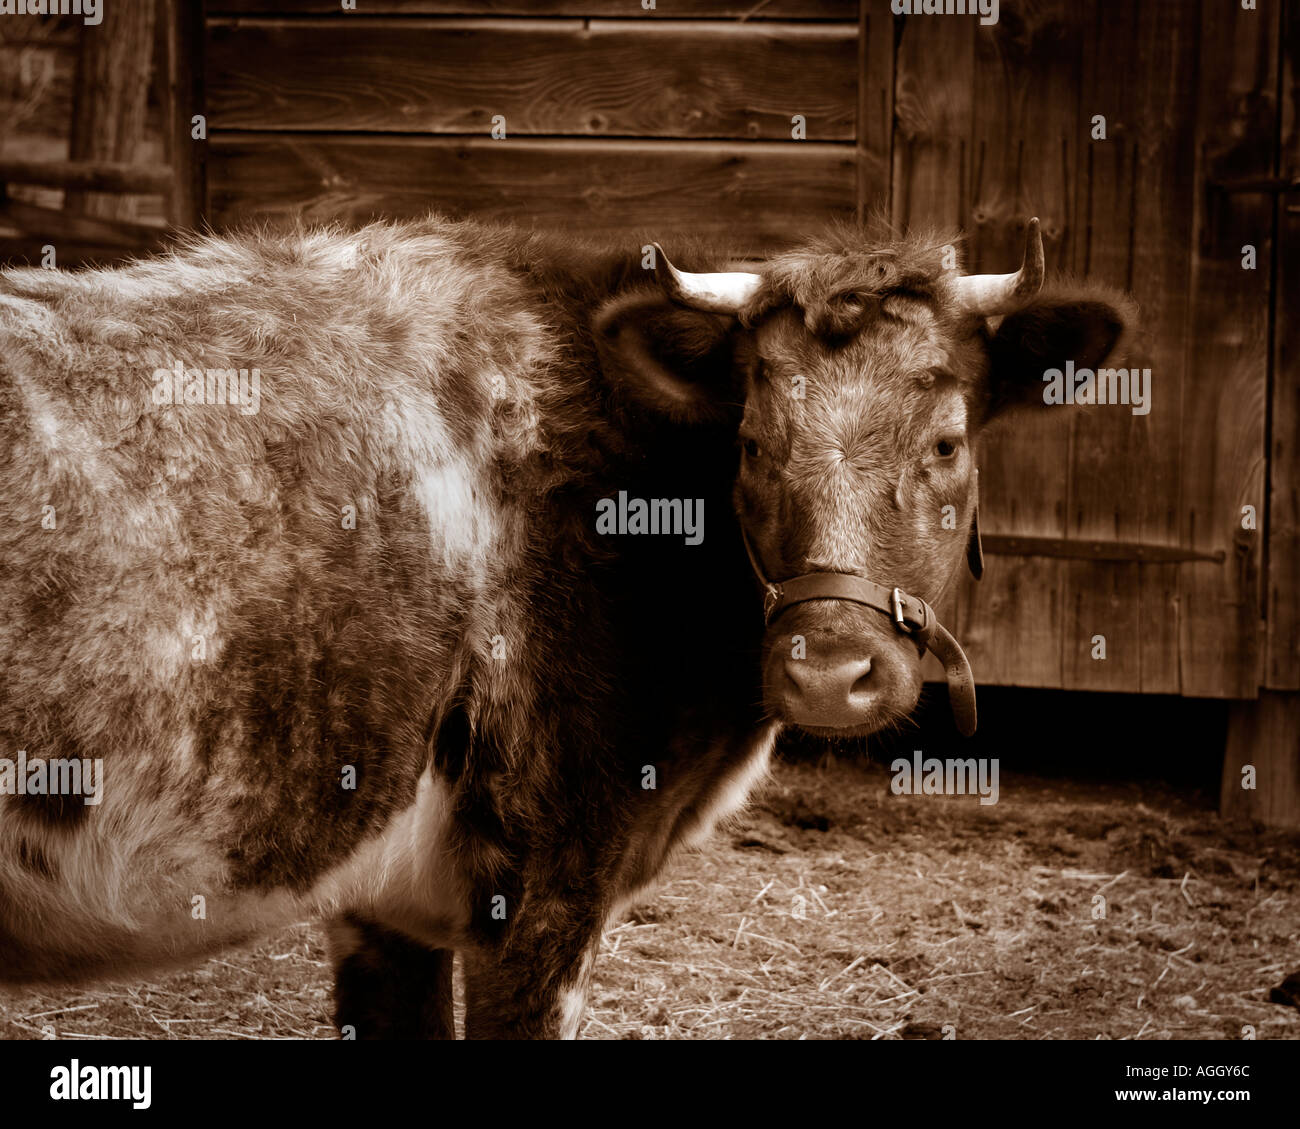 cow looking at camera in front of wooden barn doors sepia toned Stock Photo